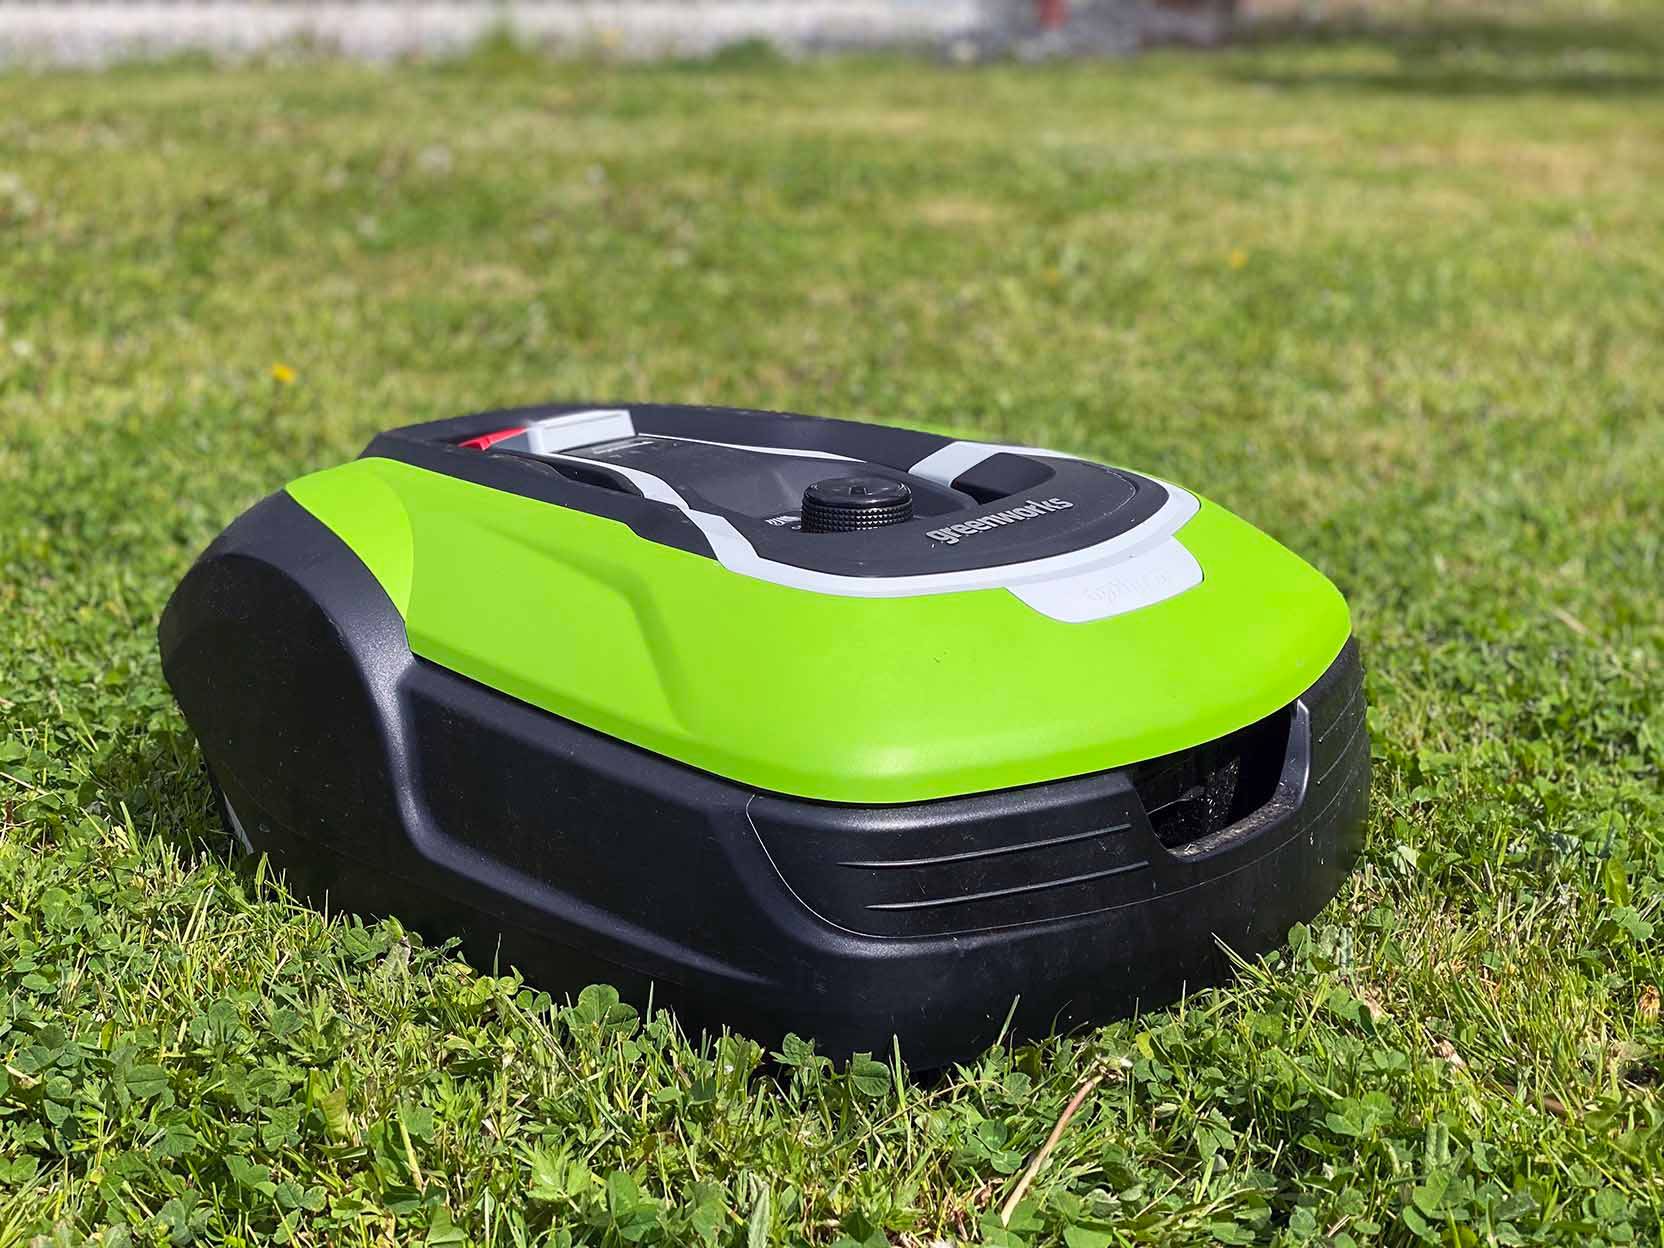 Worx Landroid Review: Is a Robotic Mower Worth it? - Tested by Bob